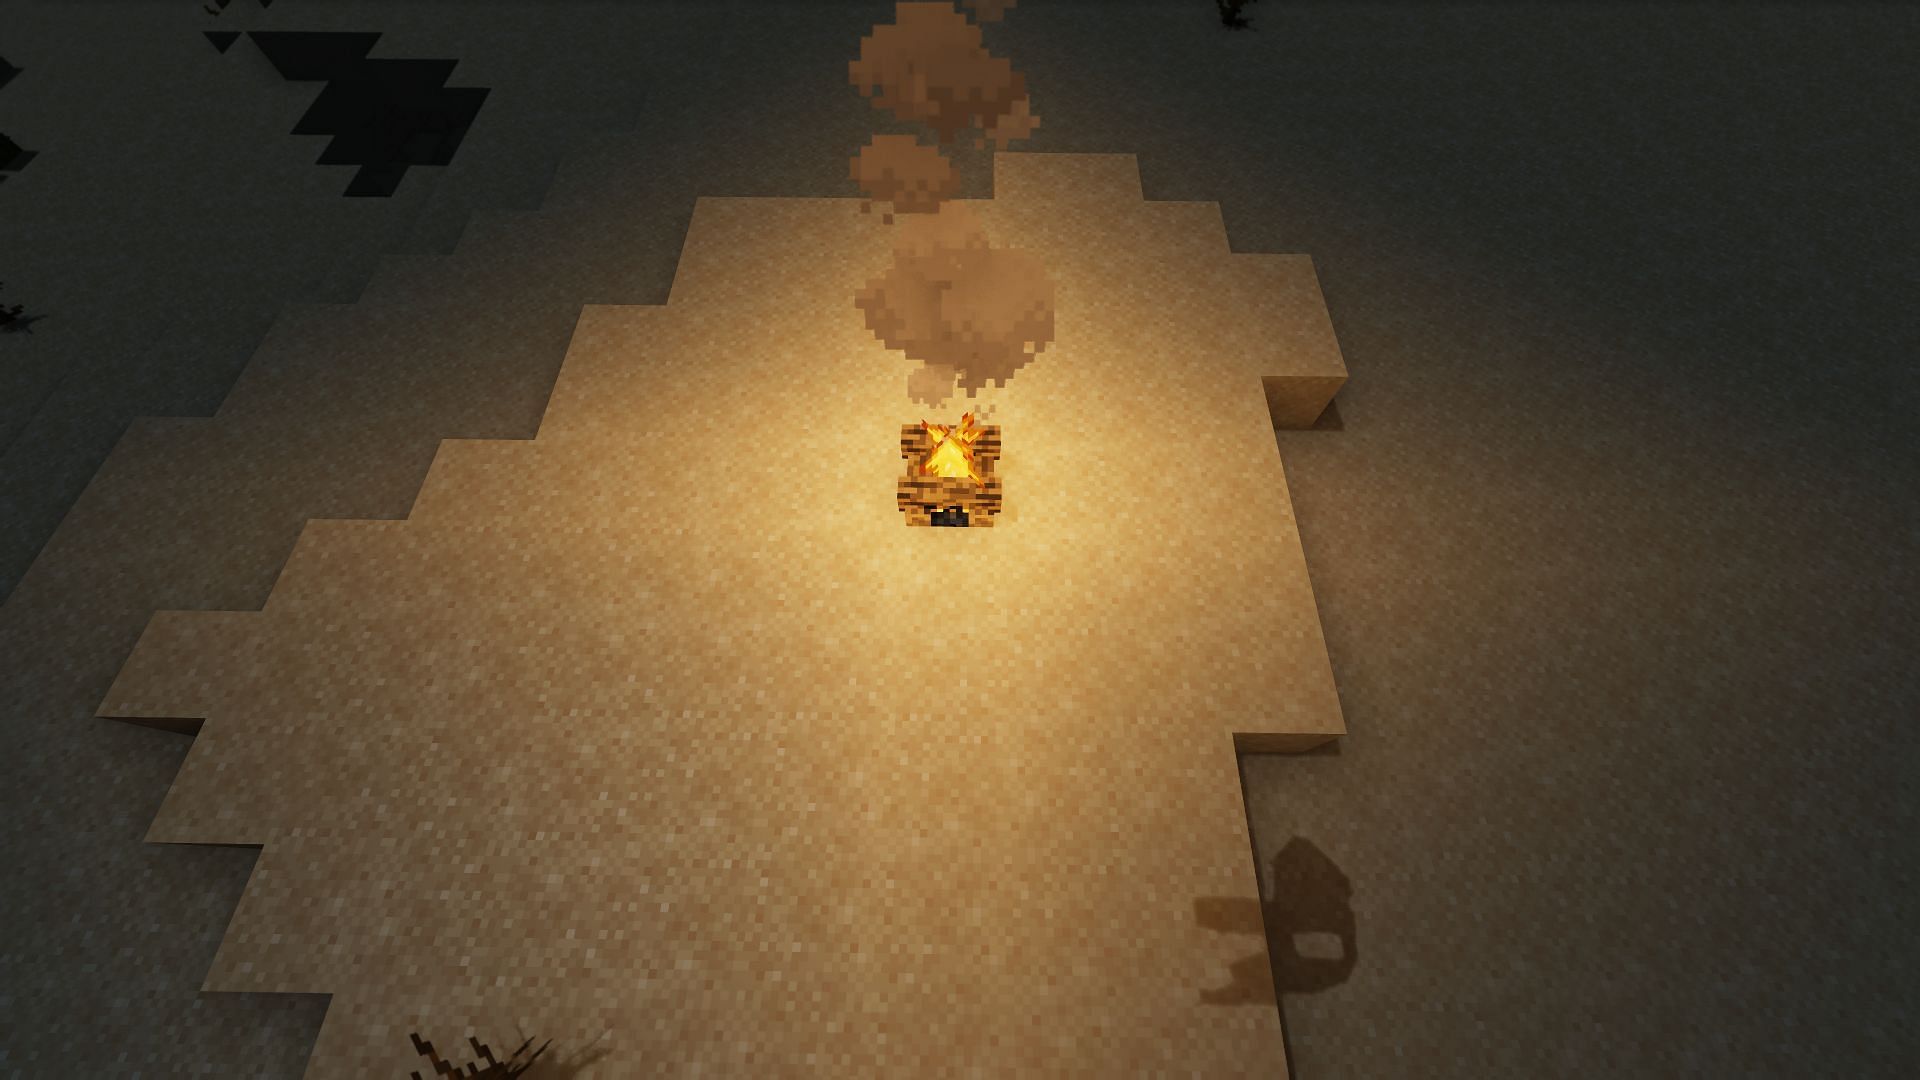 How much a campfire spreads light (Image via Minecraft)